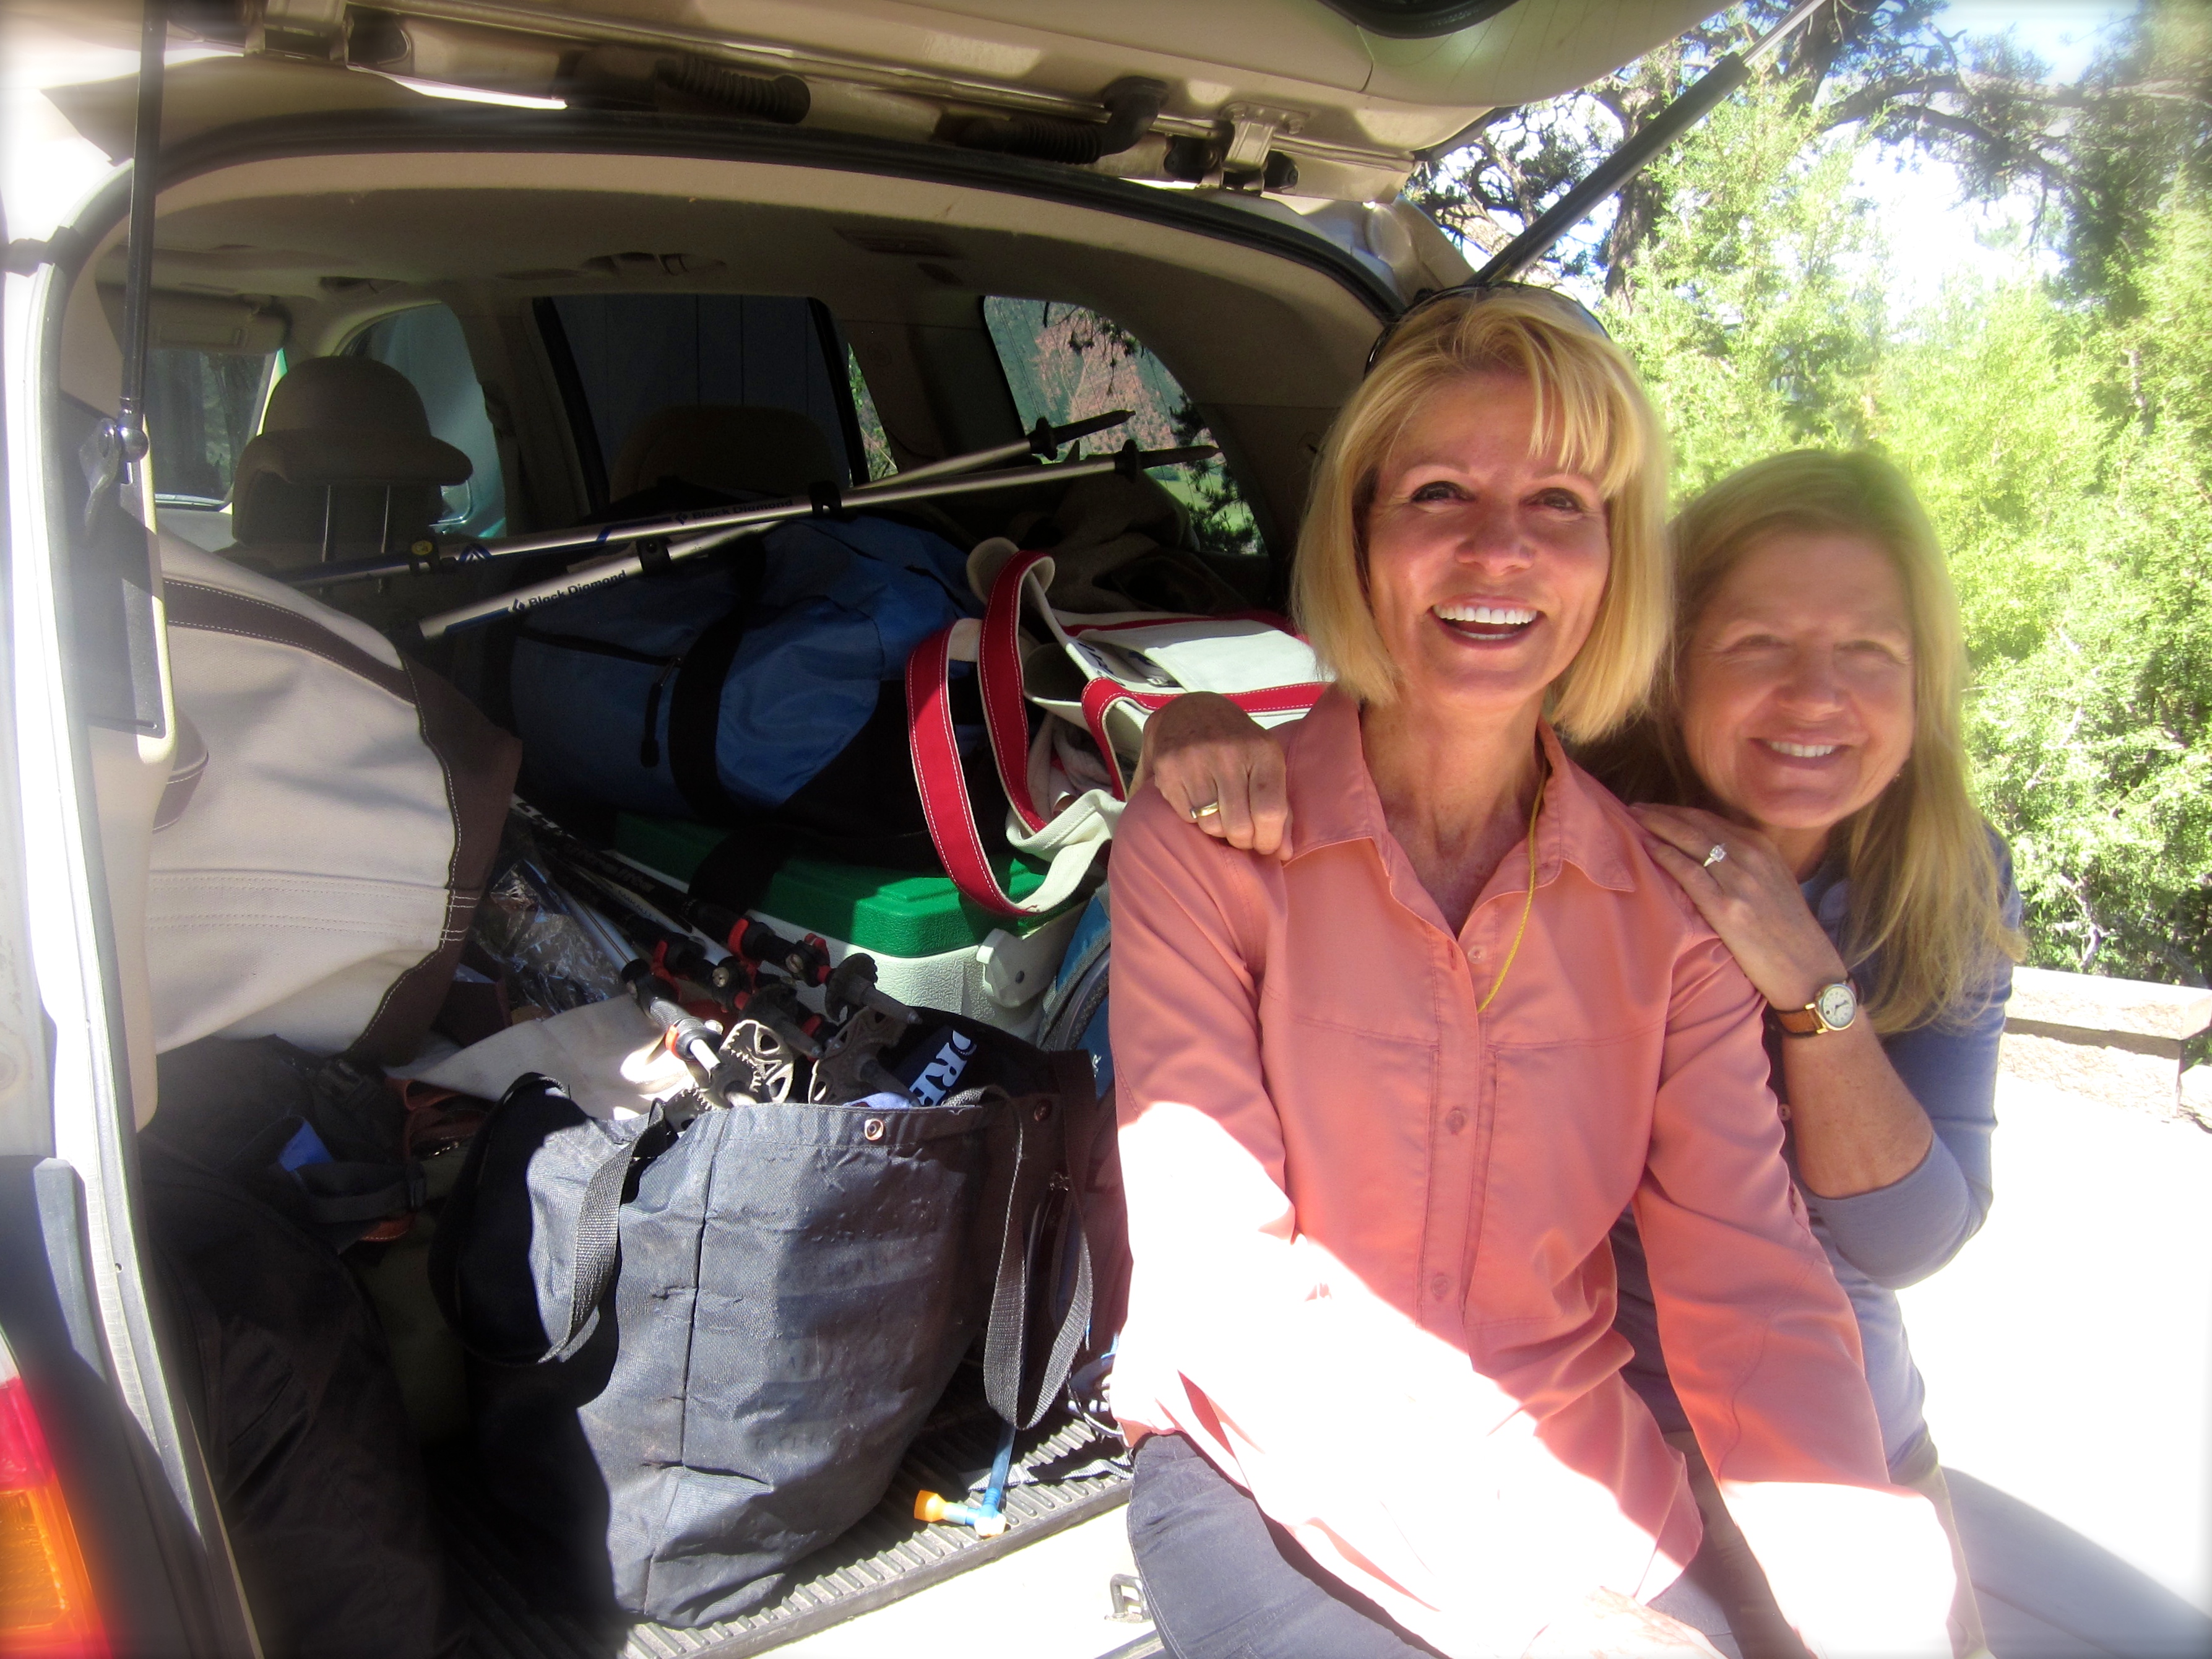 DonnaC and Francine are unable to explain why an overnight trip with four women requires all this luggage.(So, they smiled instead.)